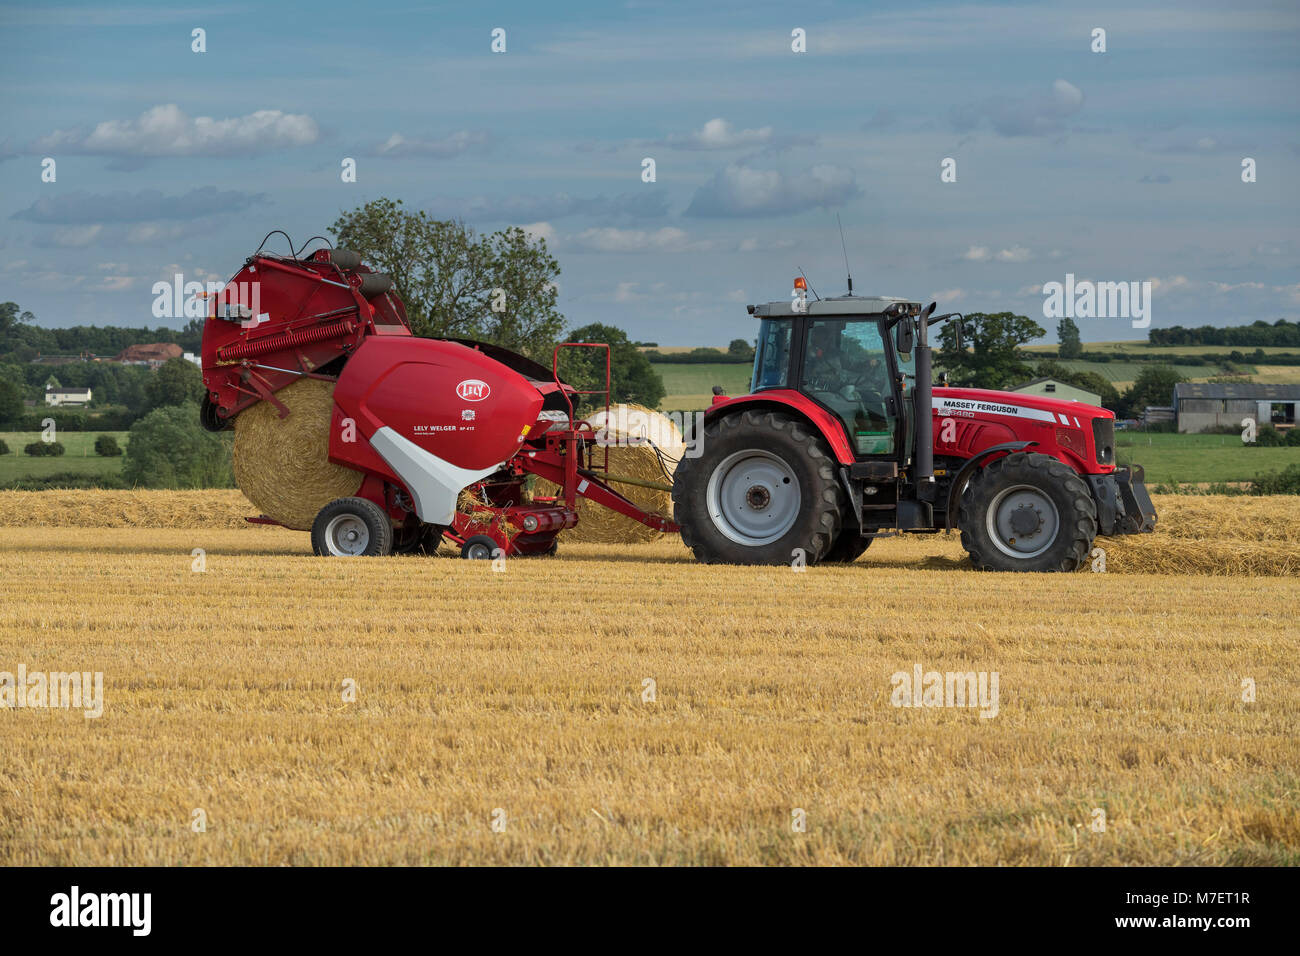 Baling straw in farm field, farmer works & drives red tractor pulling round baler (just releasing large bale) - Whixley, North Yorkshire, England, UK. Stock Photo